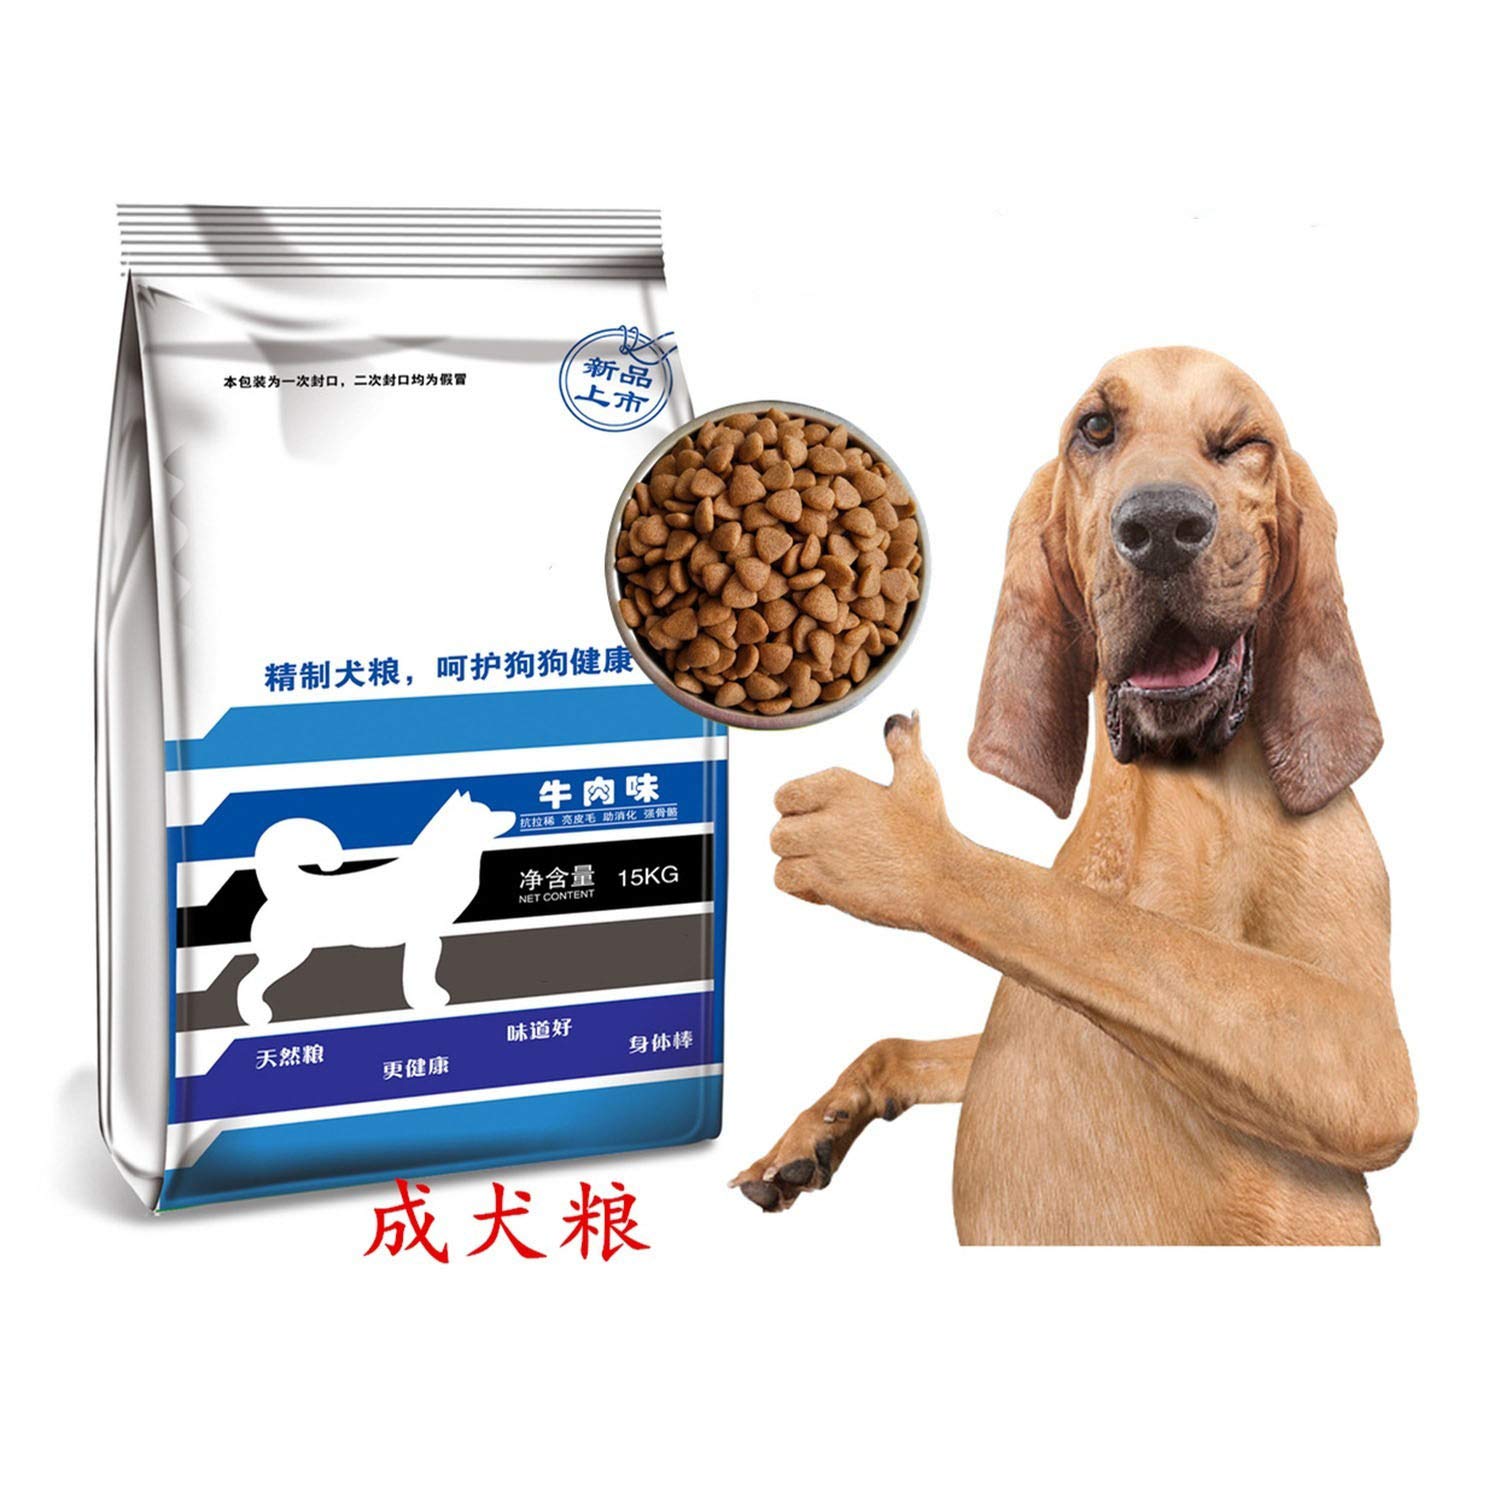 Golden Retriever Food. What Is The Best Food For Golden ...